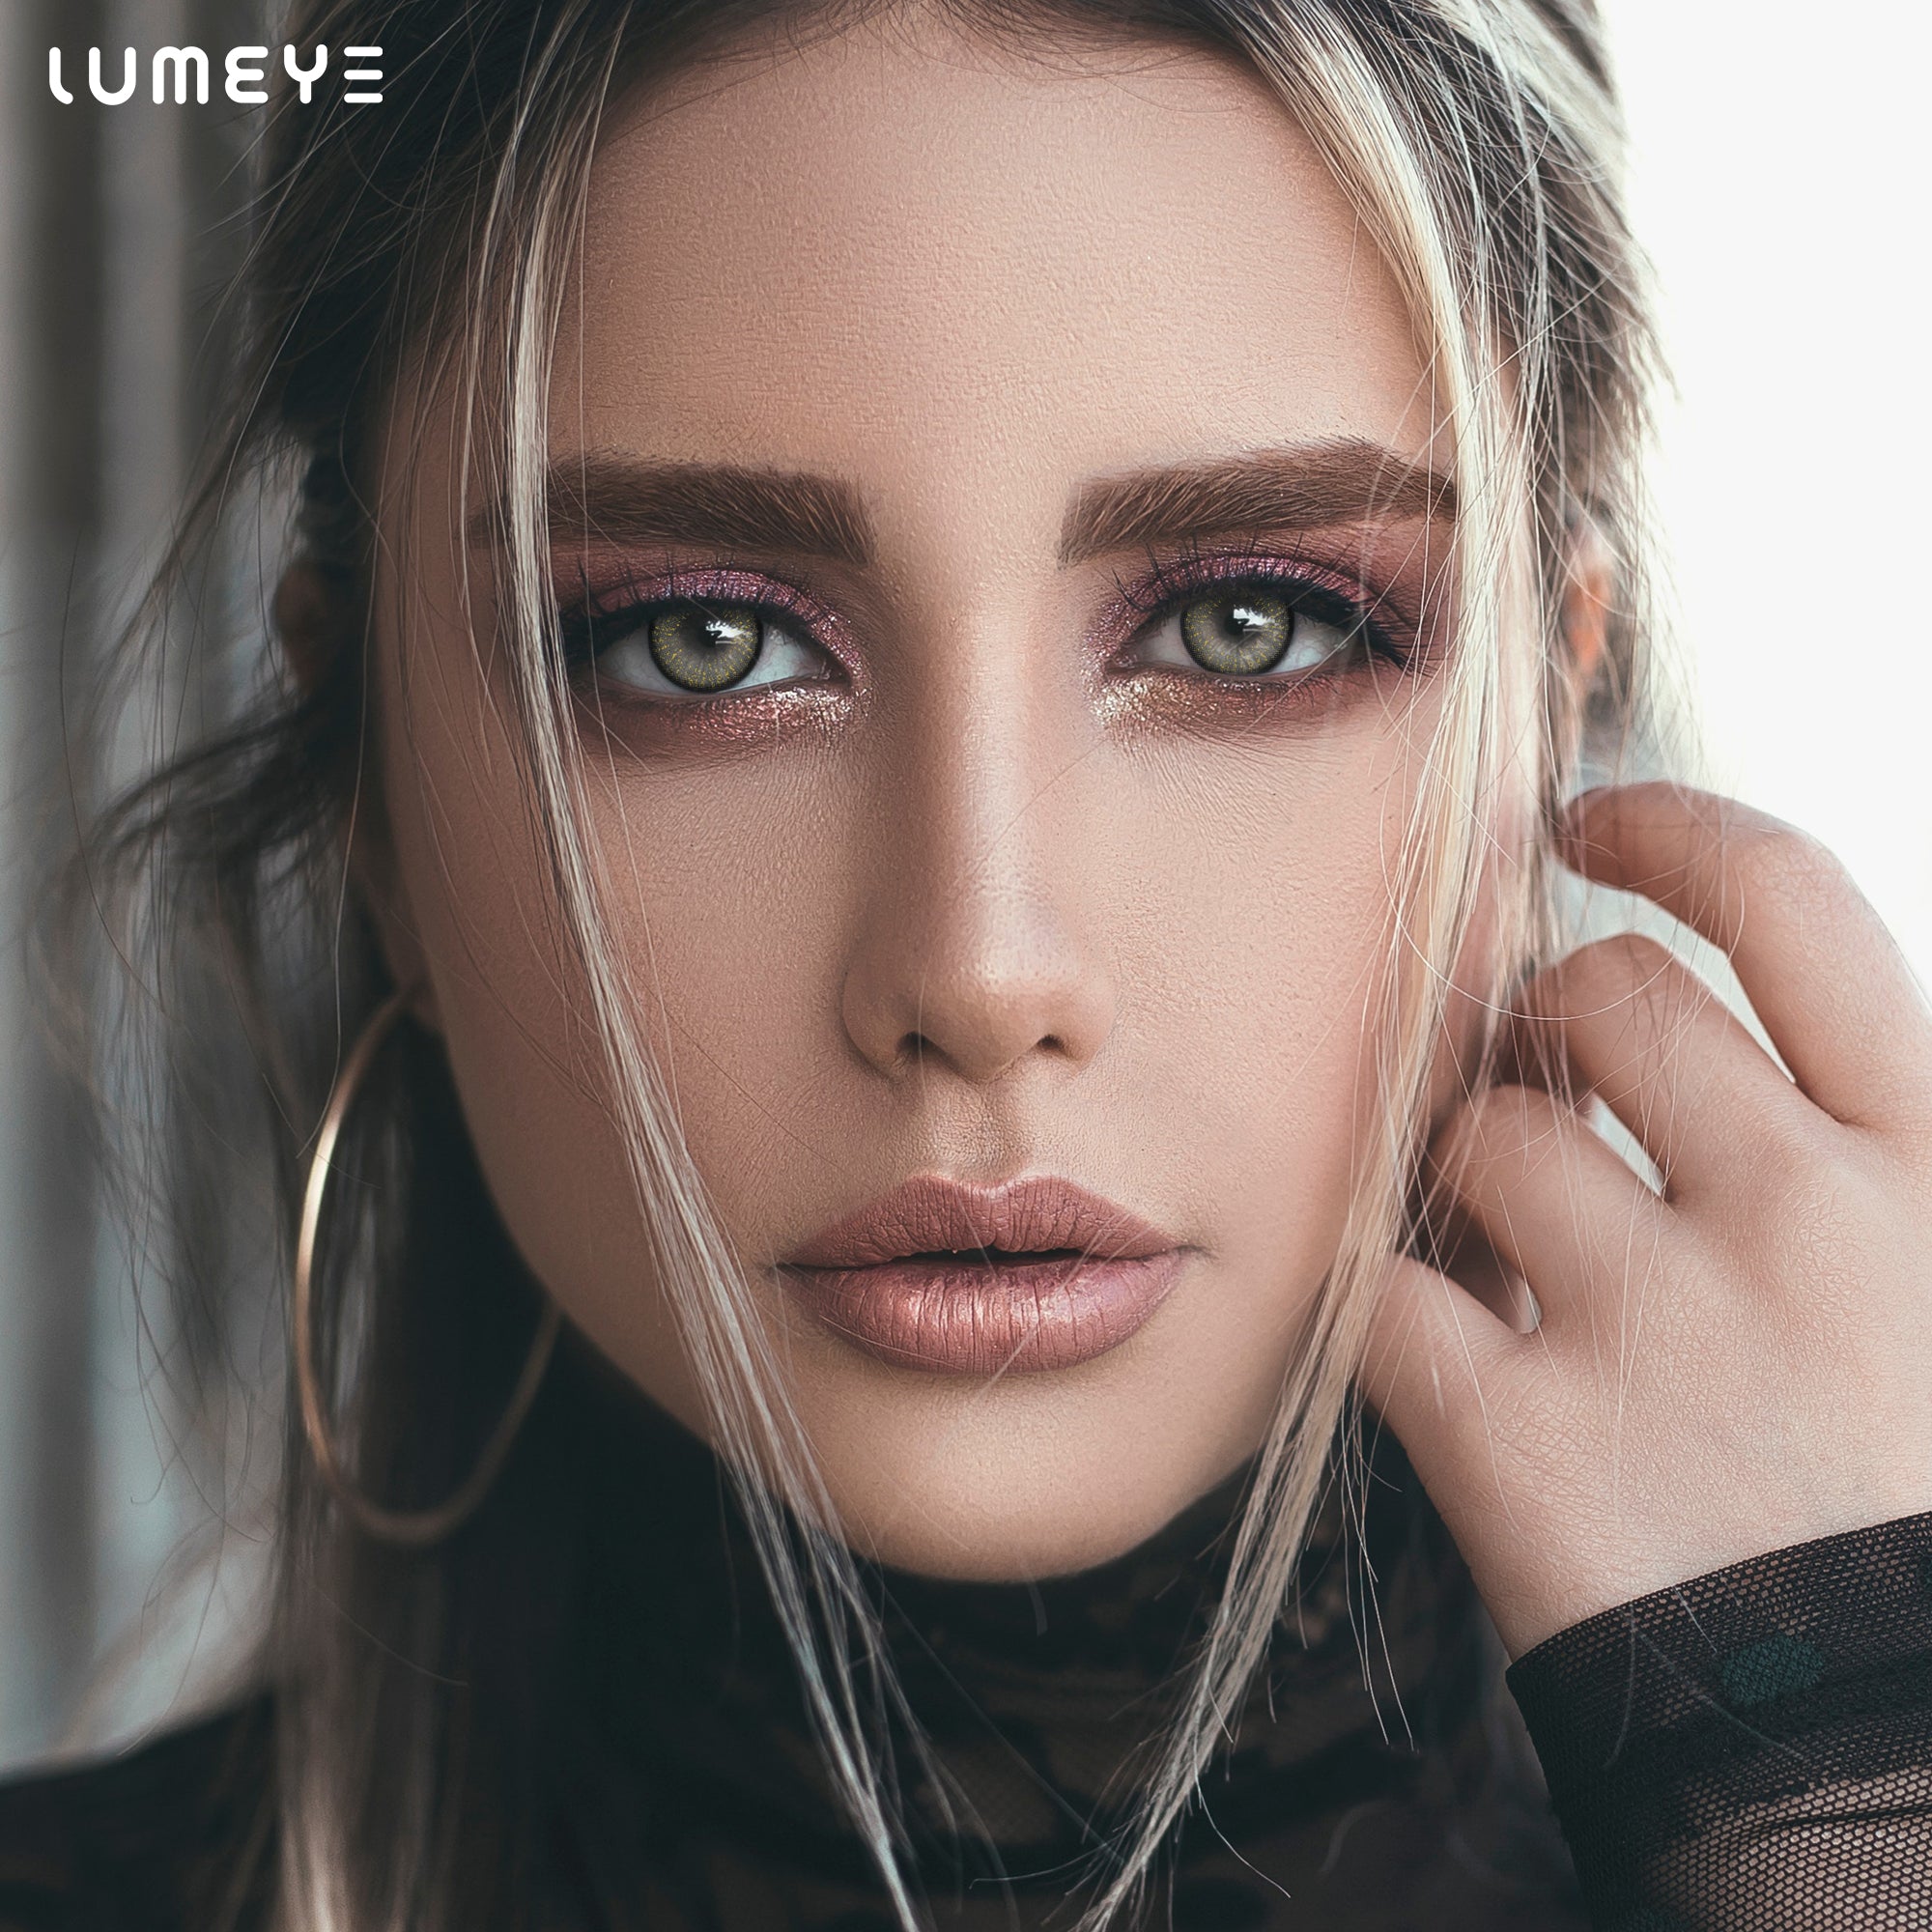 Best COLORED CONTACTS - LUMEYE Gold Foil Gray Colored Contact Lenses - LUMEYE